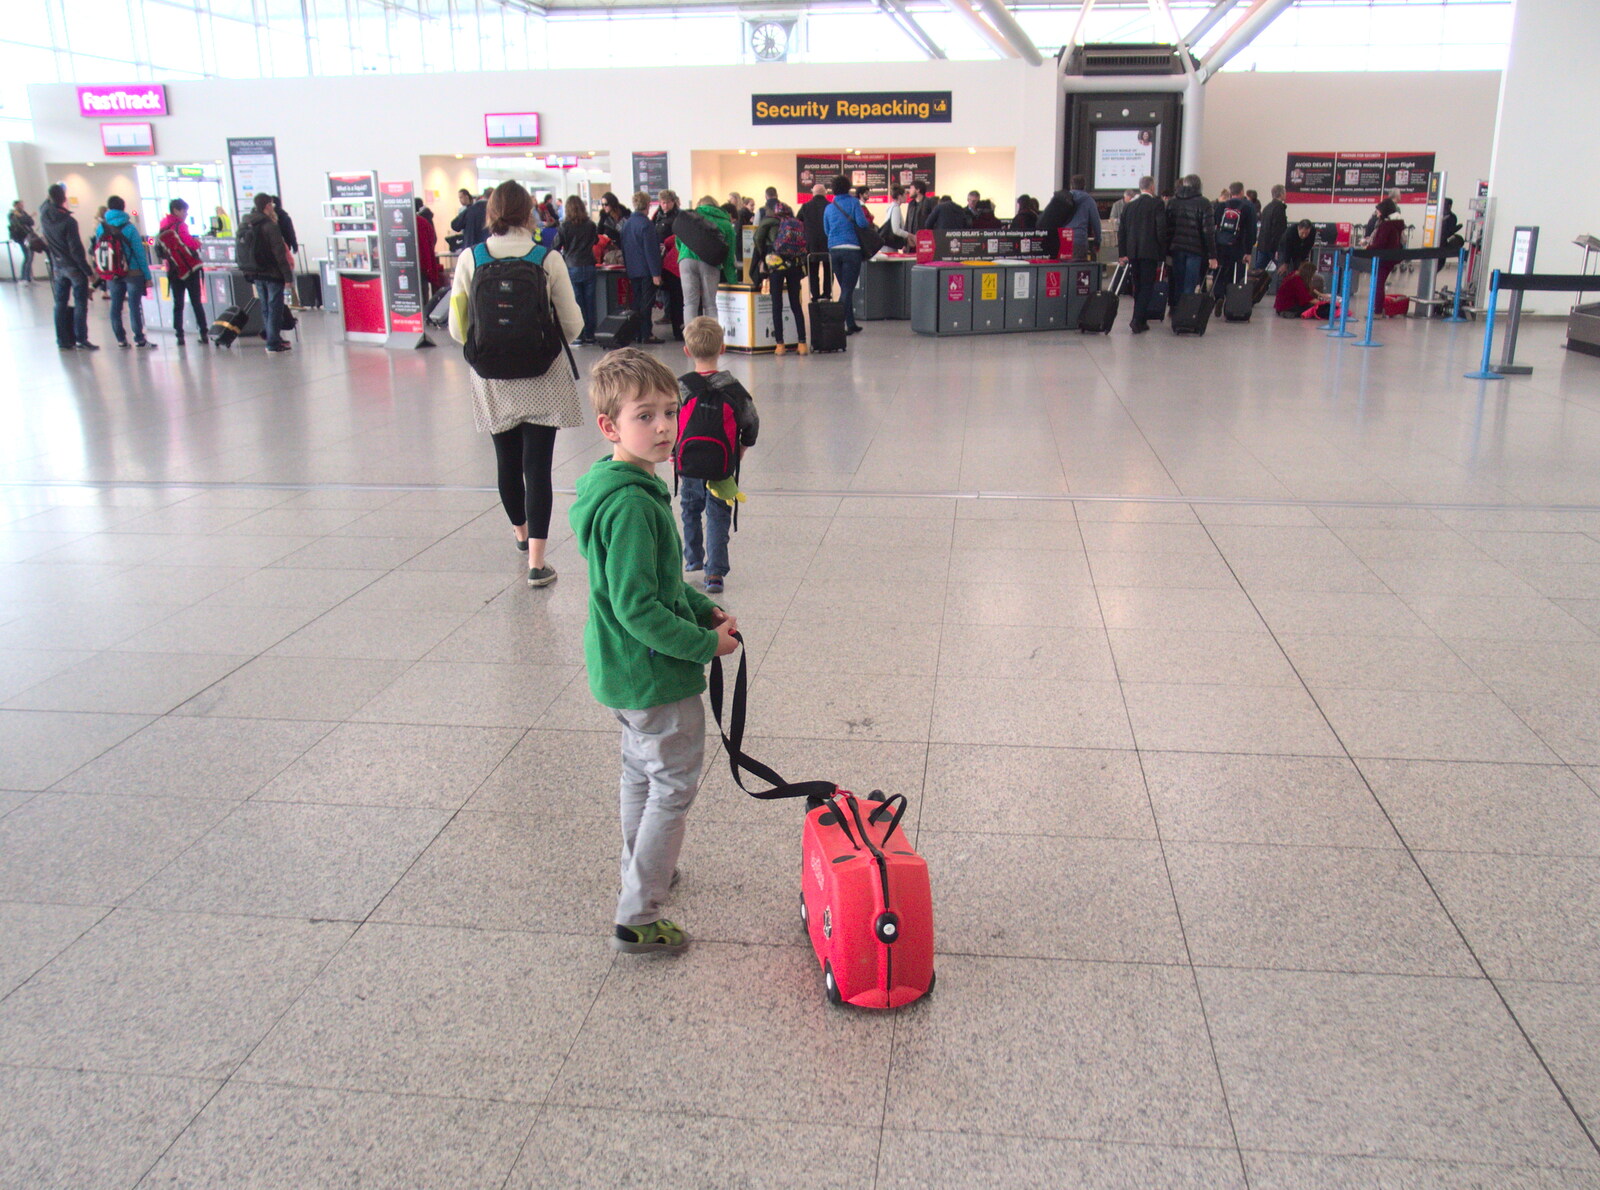 Fred hauls his Trunki around the check-in area from A Trip to Albufeira: The Hotel Paraiso, Portugal - 3rd April 2016